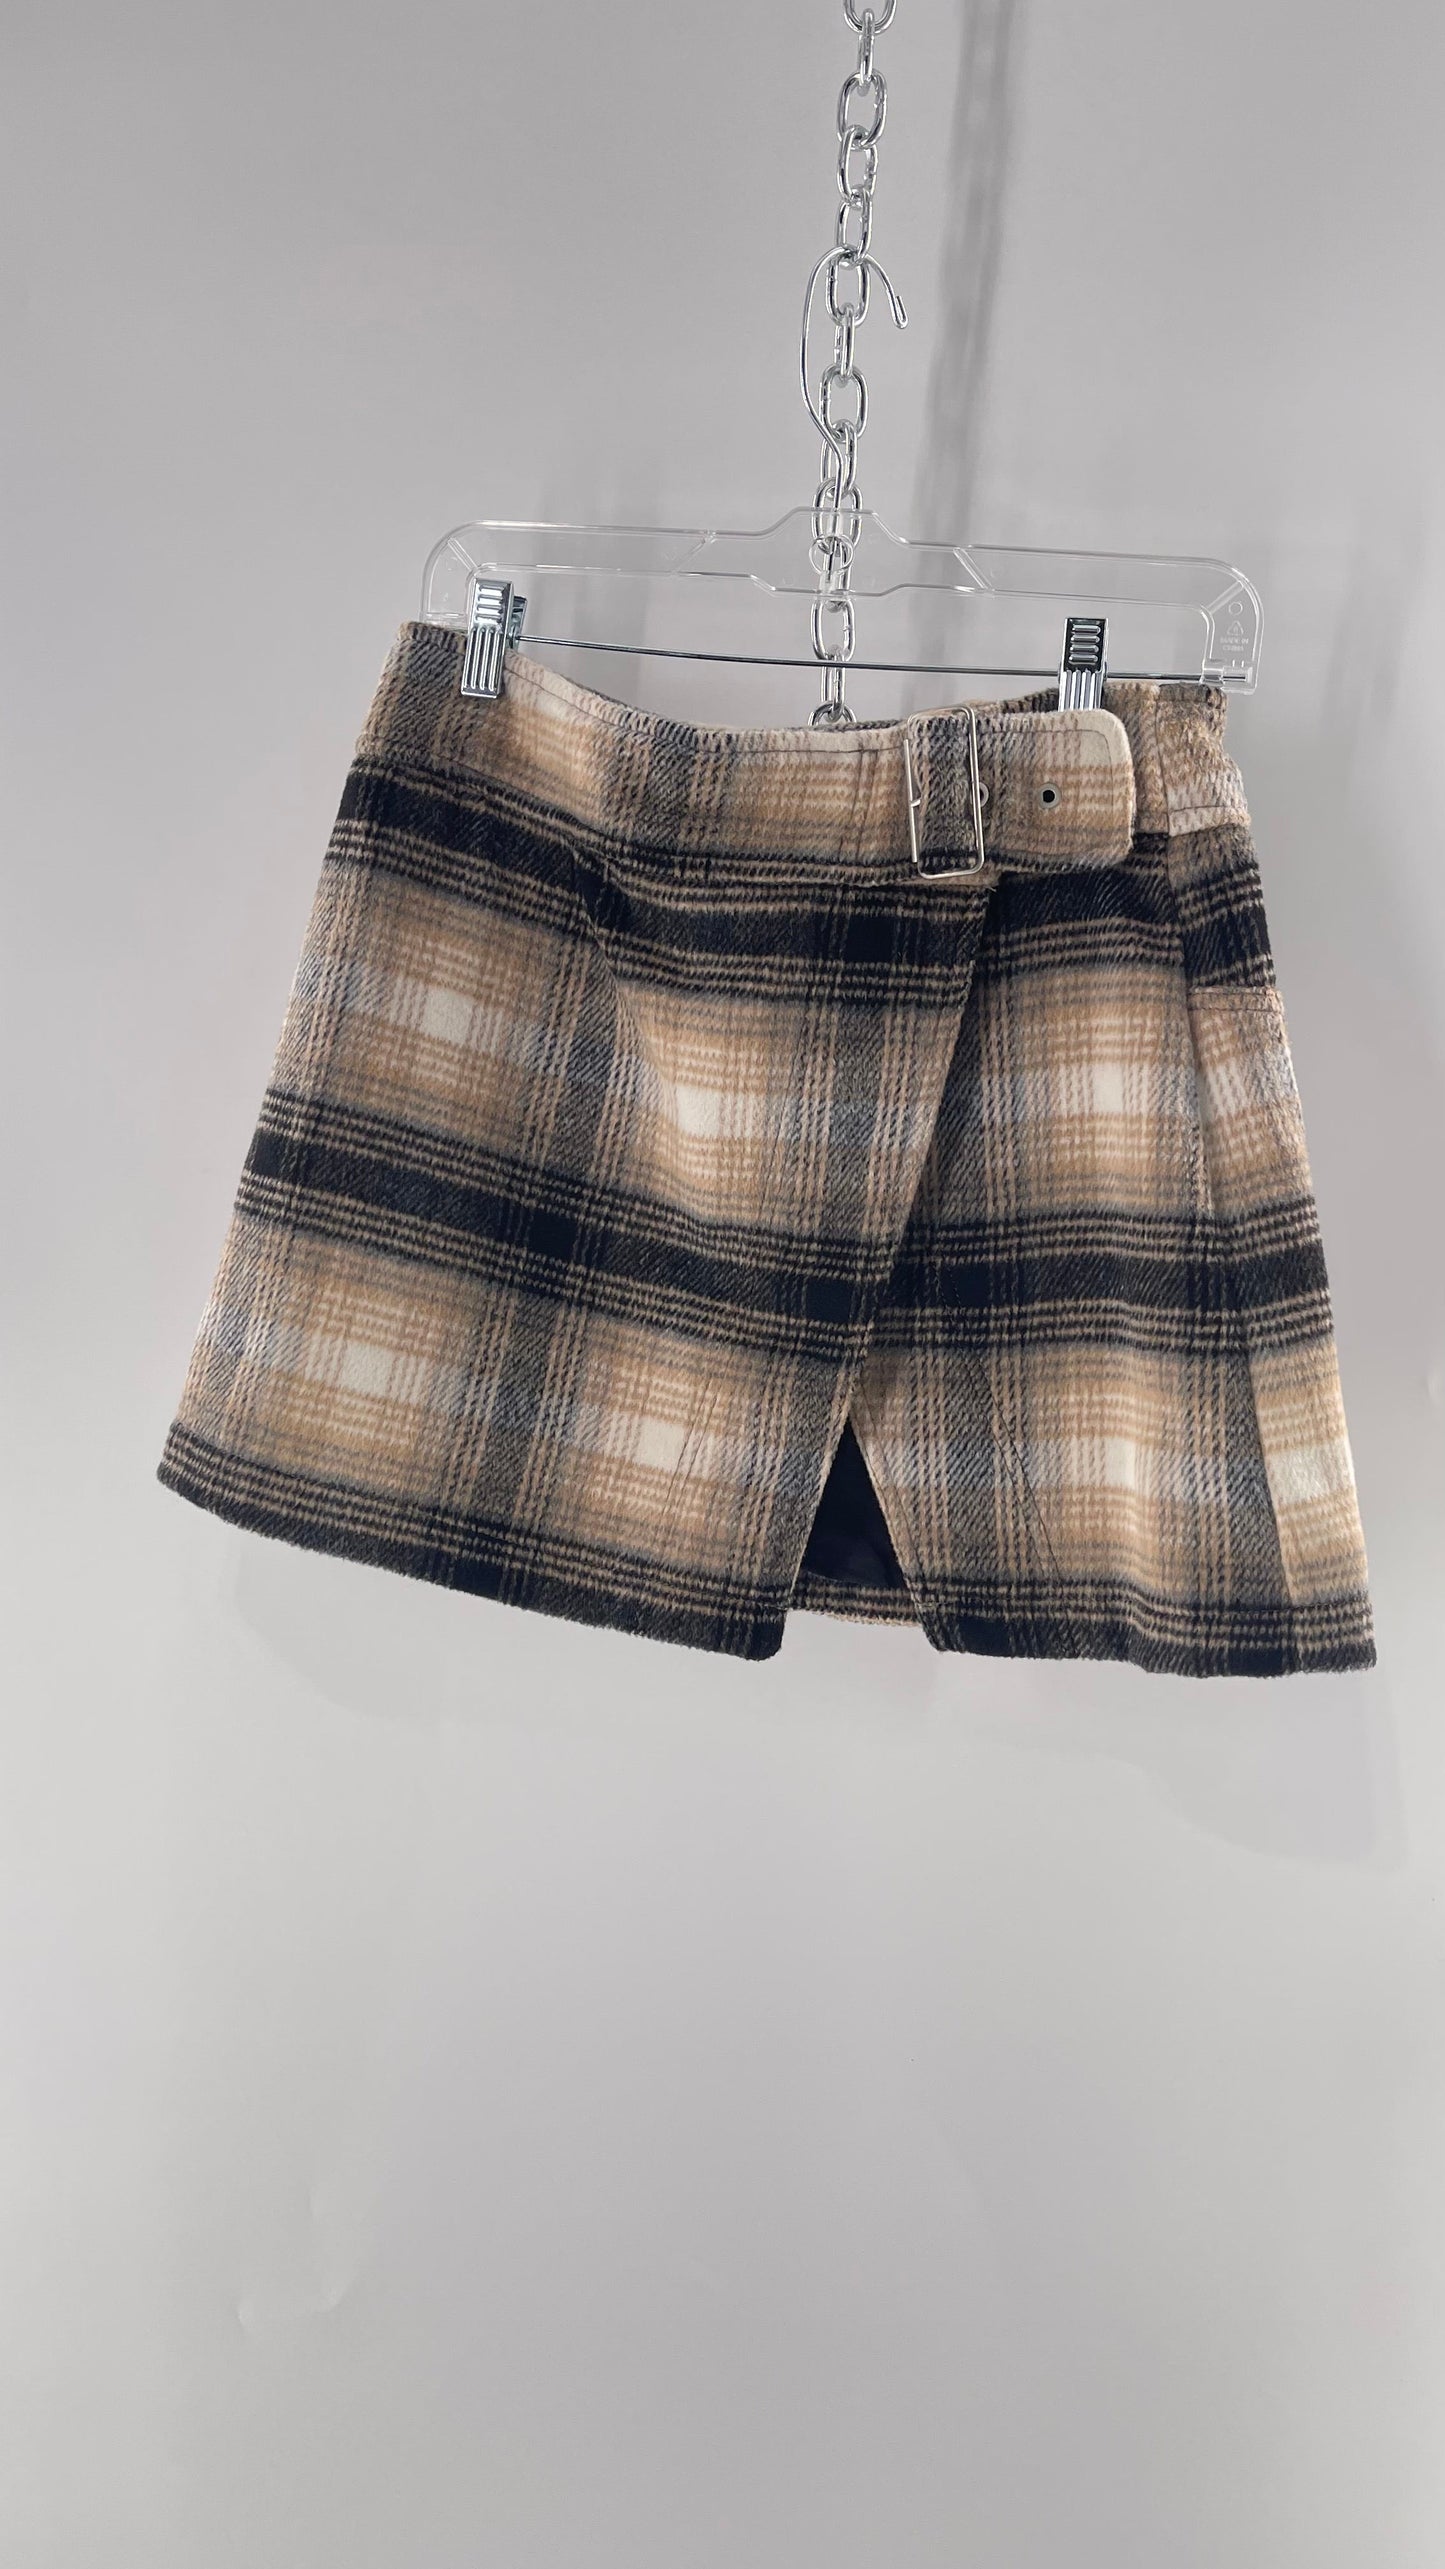 Free People Plaid Beige Gray Soft Mini Skirt with Side Slit and Built in Grommet Belt (10)